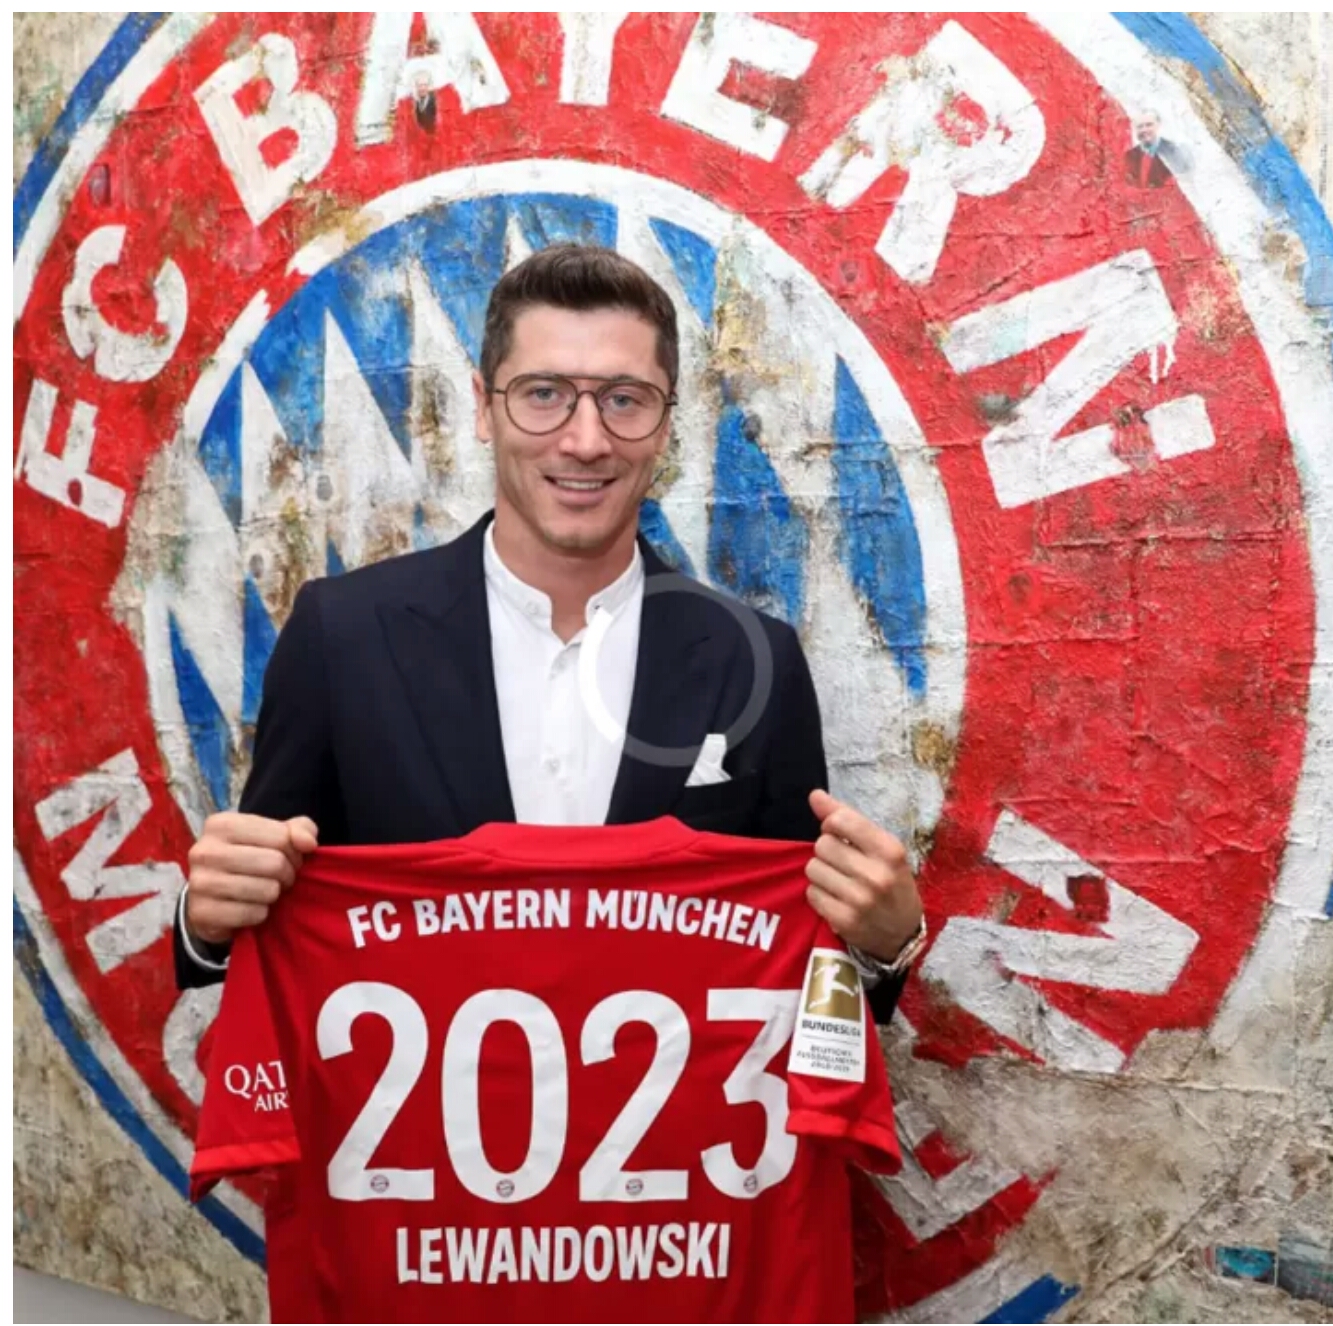 Lewandowski officially extends his contract with Bayern Munich to 2023